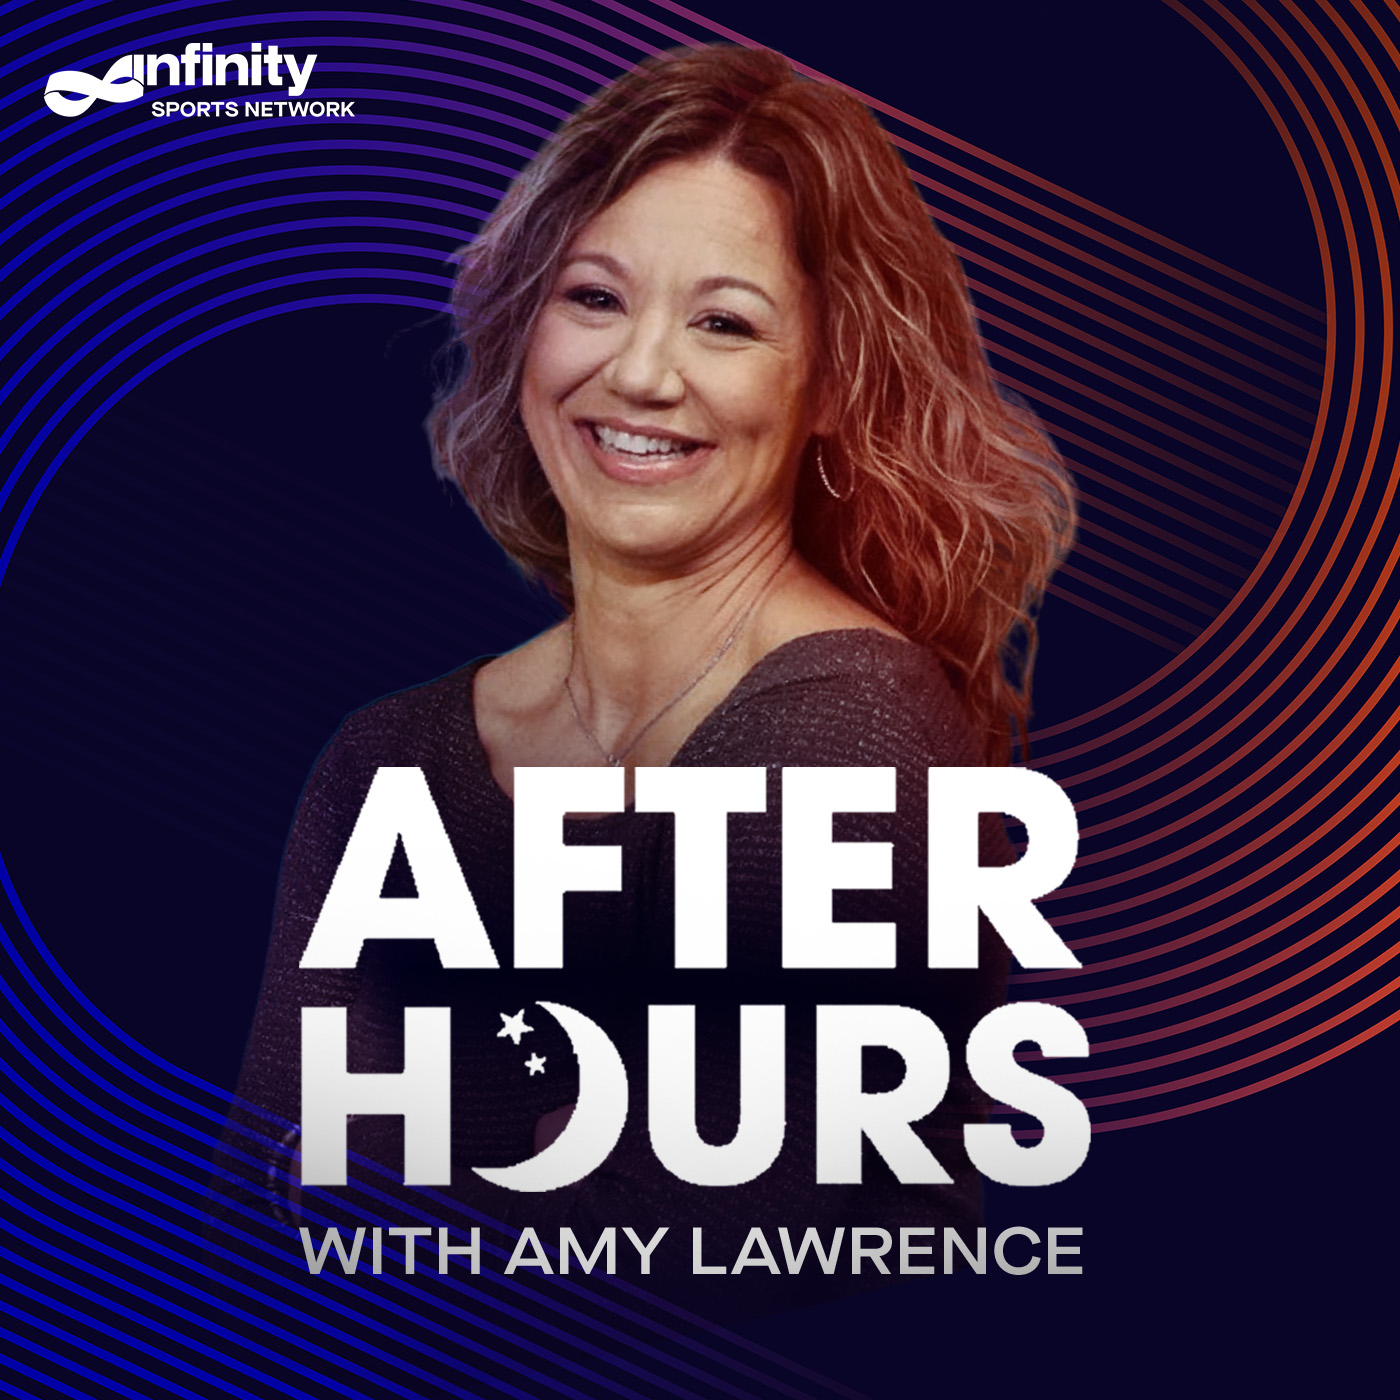 1-21-22 After Hours with Amy Lawrence PODCAST: Hour 1